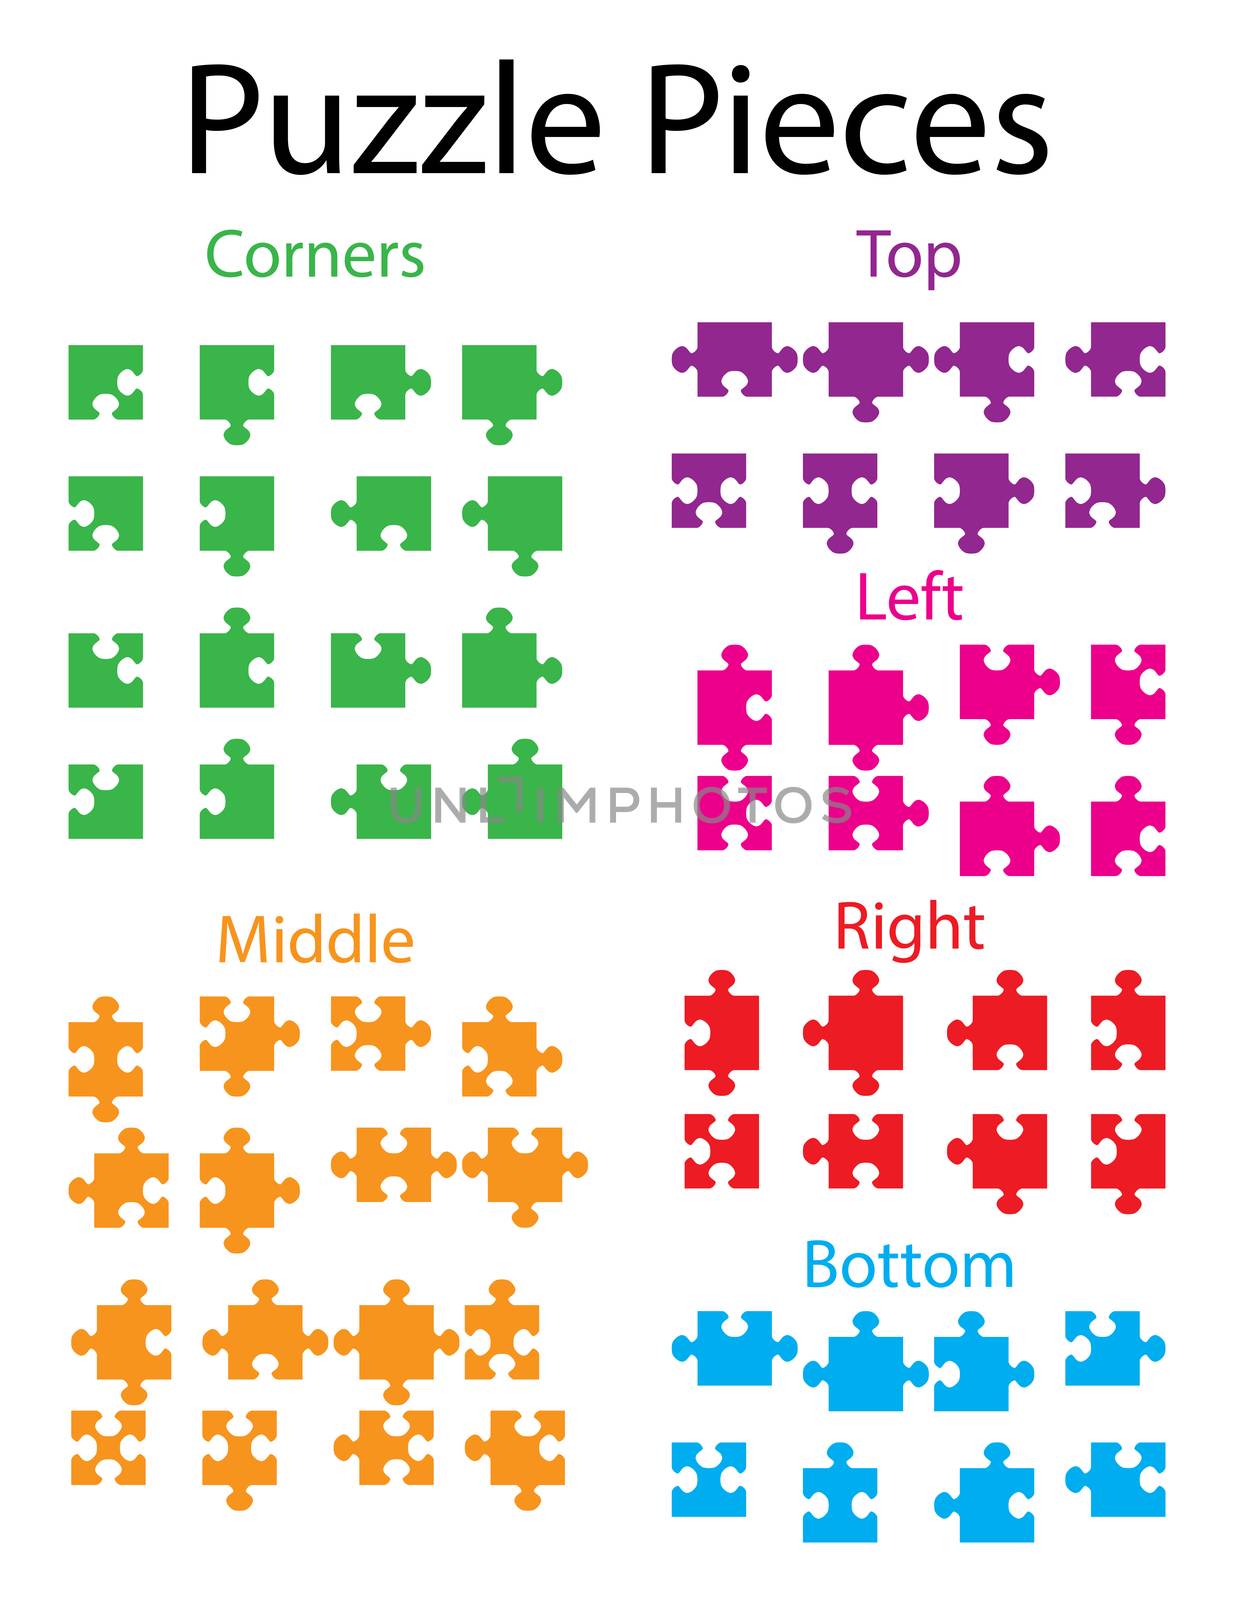 An Illustration of Jigsaw puzzle blank parts